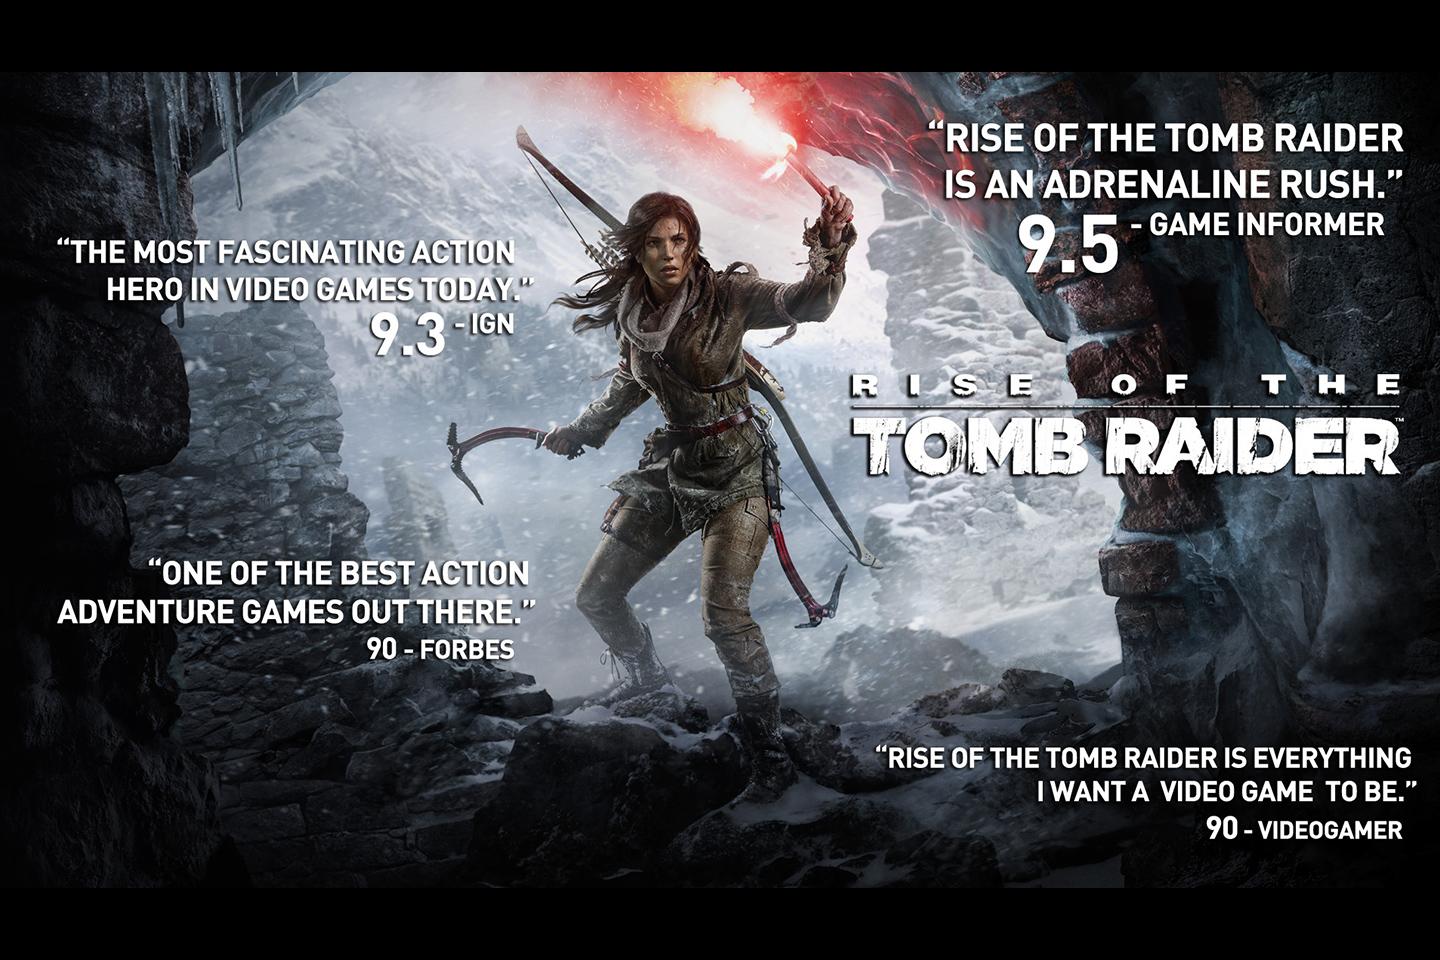 Promotional image for Rise of the Tomb Raider featuring Lara Croft in a snowy landscape with critical acclaim quotes and scores from various publications overlaying the scene.